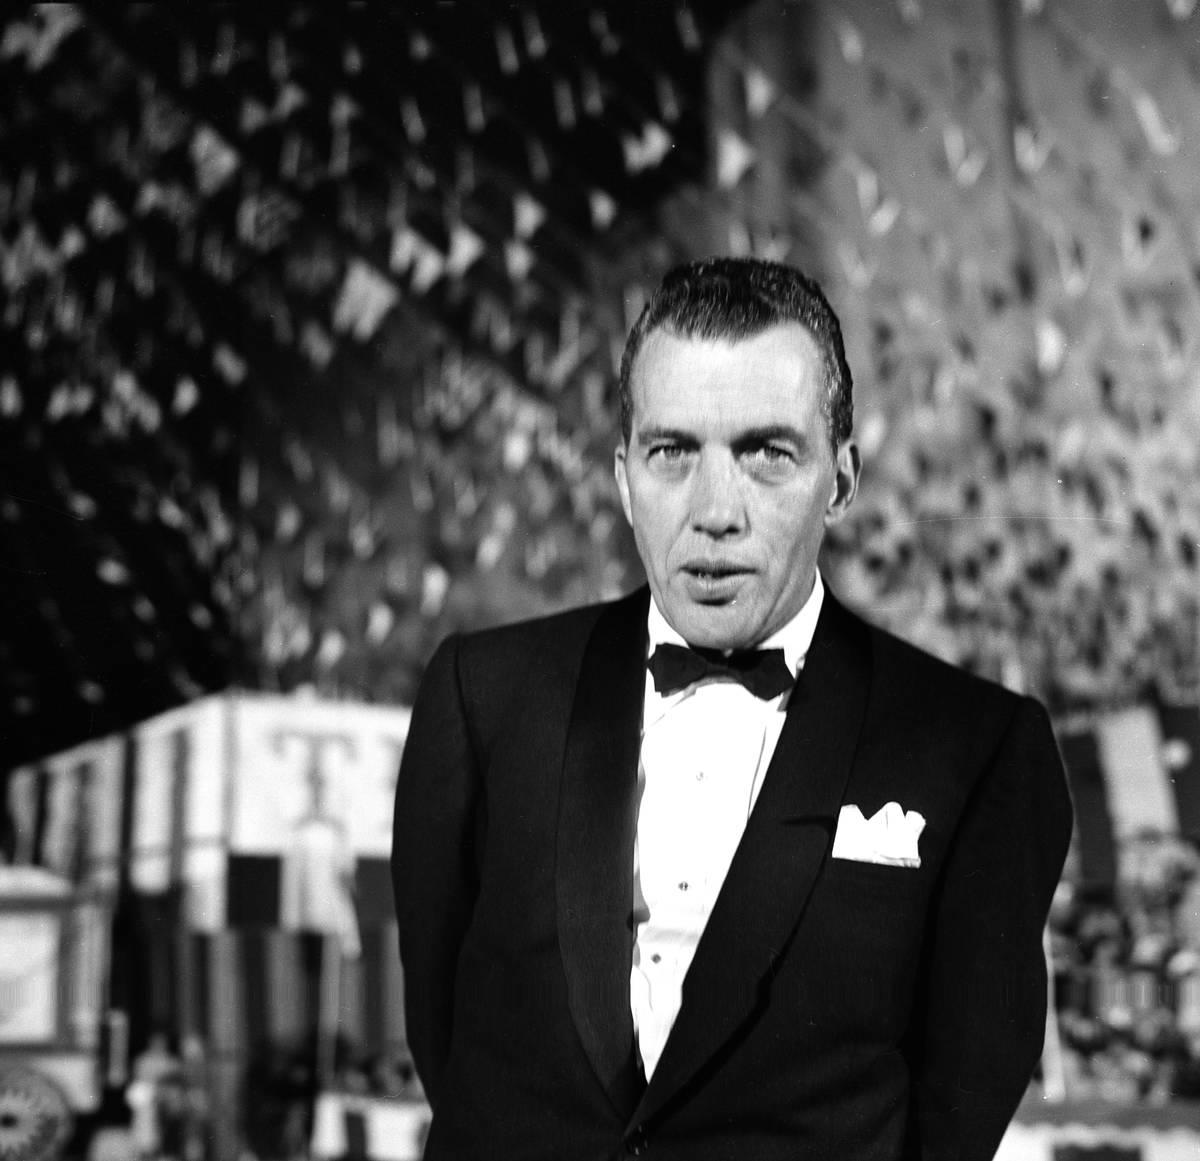 <p>Delivering to the audience is paramount in any form of media, and Ed Sullivan possessed an unparalleled understanding of what would resonate with viewers. His keen sense of knowing which acts would captivate and be adored by the American audience was invaluable. The intuition he displayed throughout his remarkable 50-year career in entertainment is truly priceless.</p>